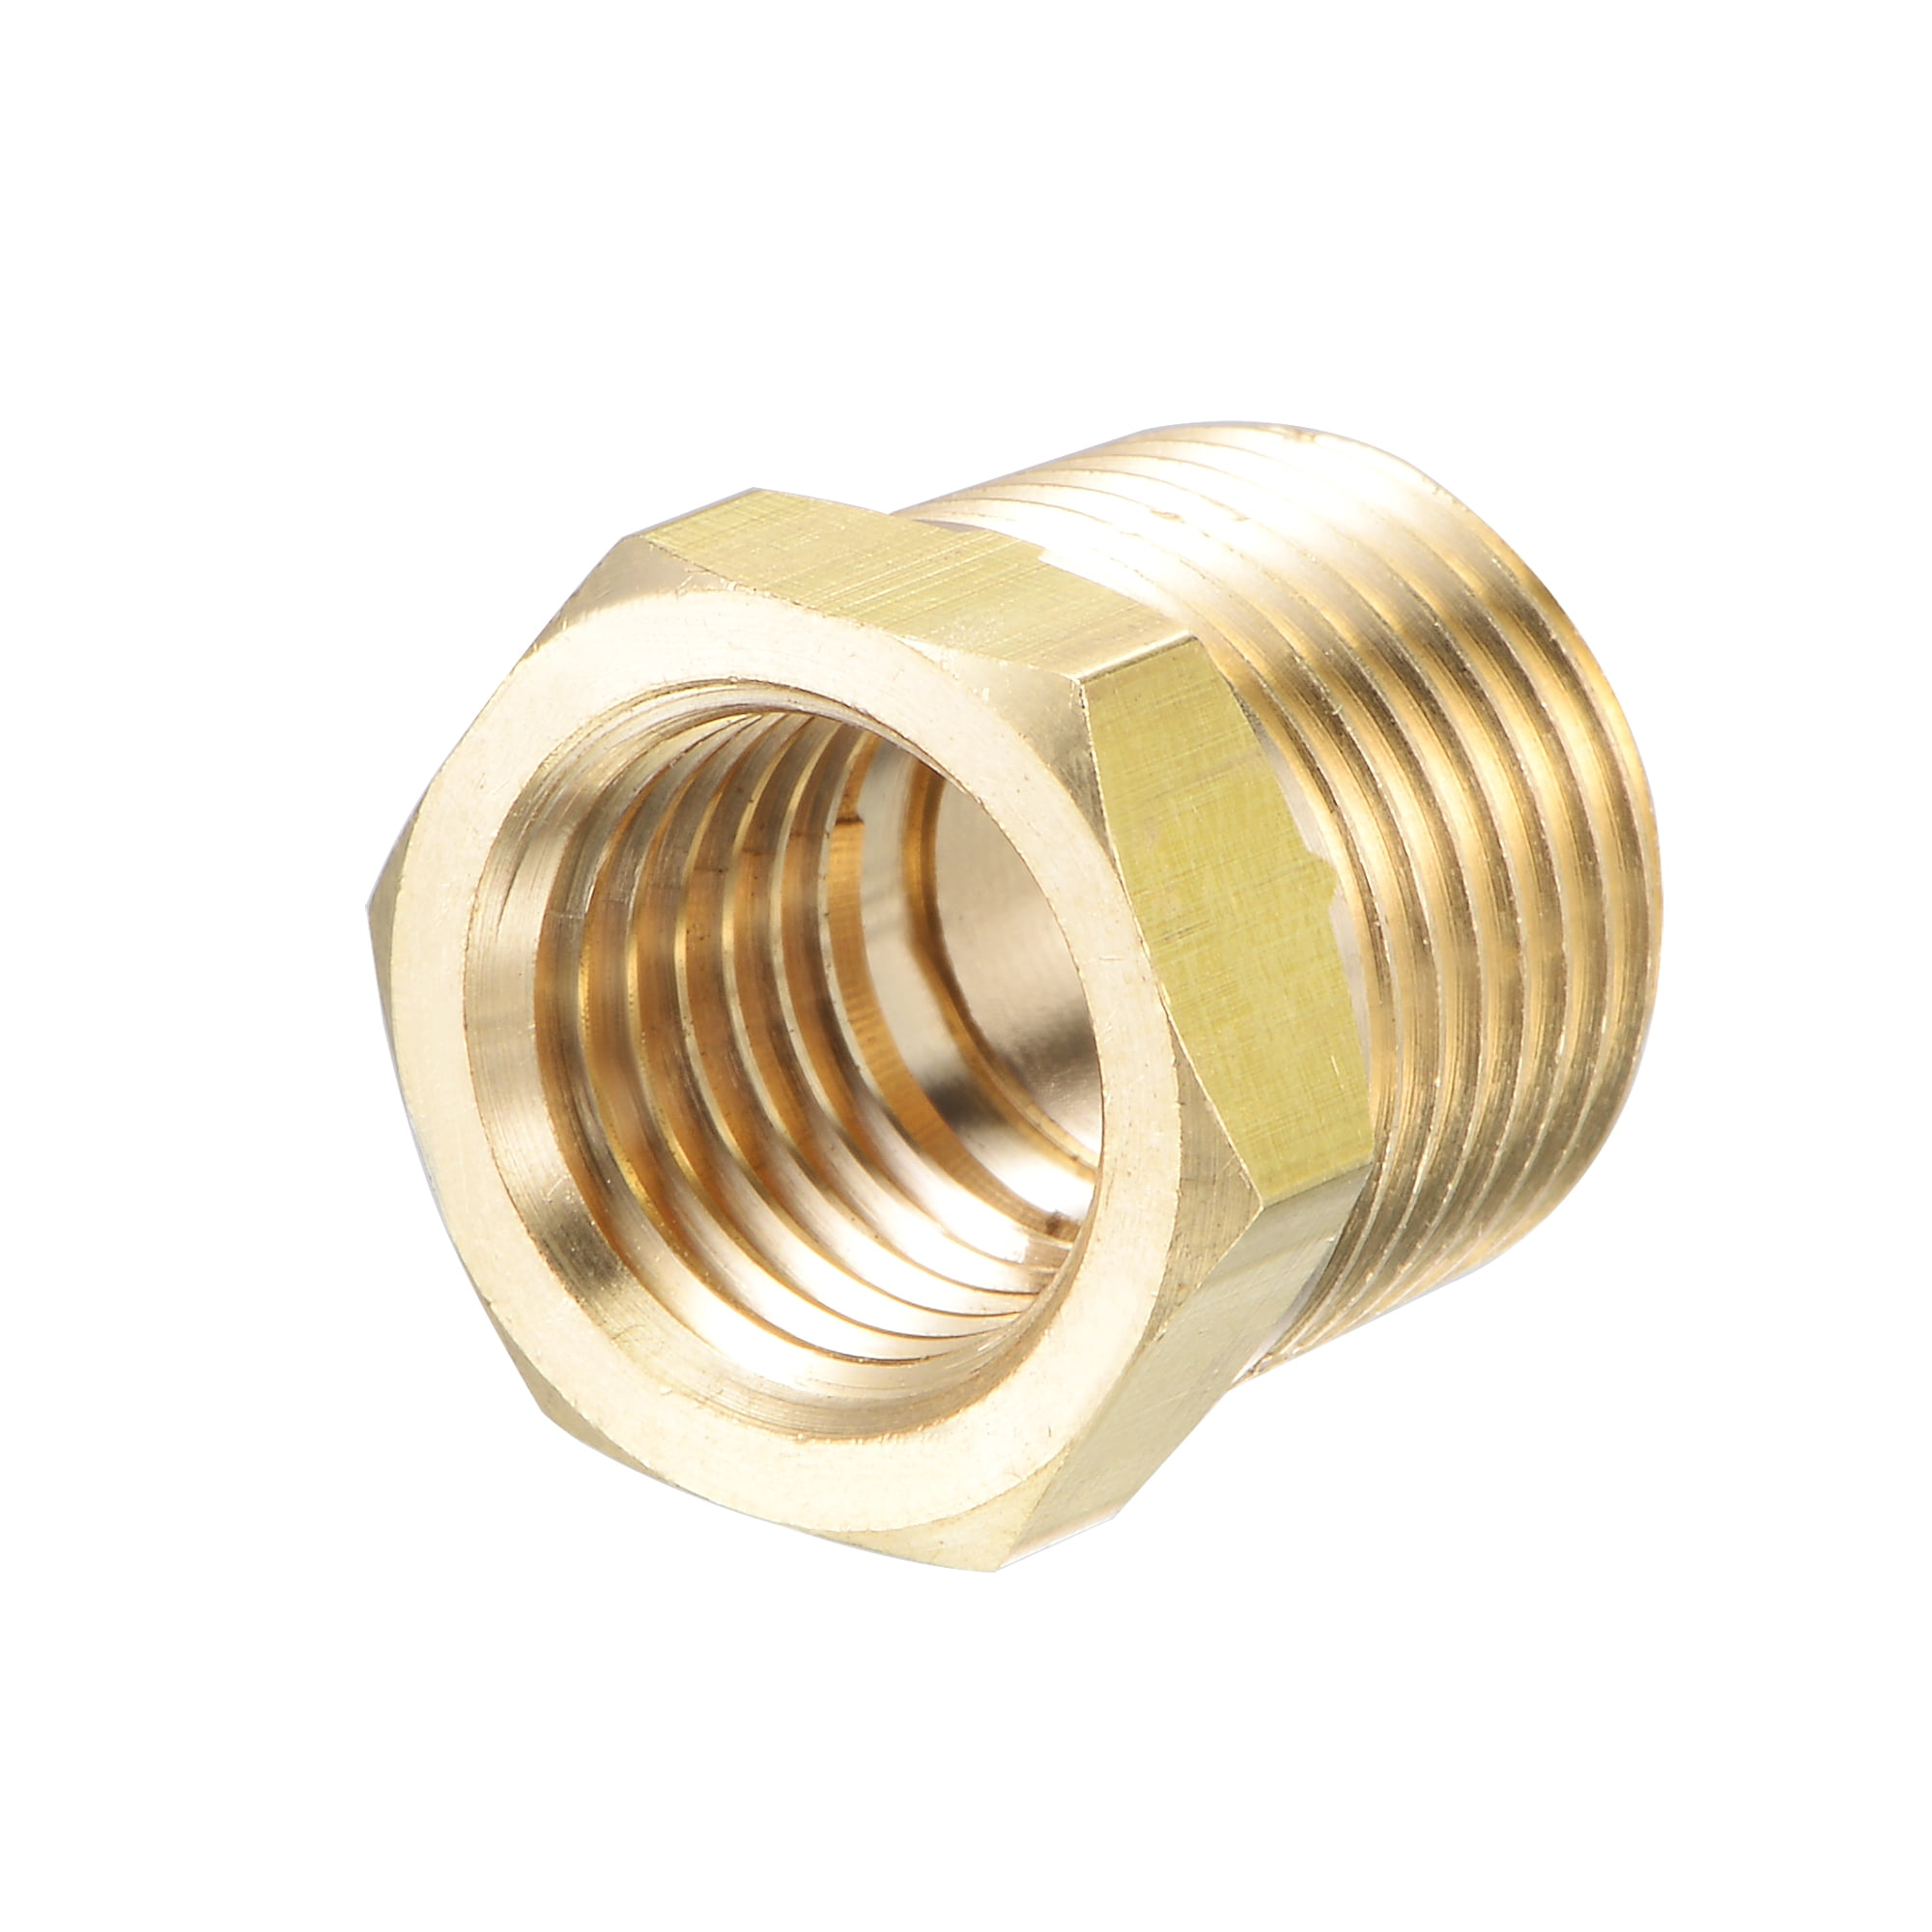 1/8" npt male x 3/8" npt female pipe reducer adapter 06120 brass pipe fitting